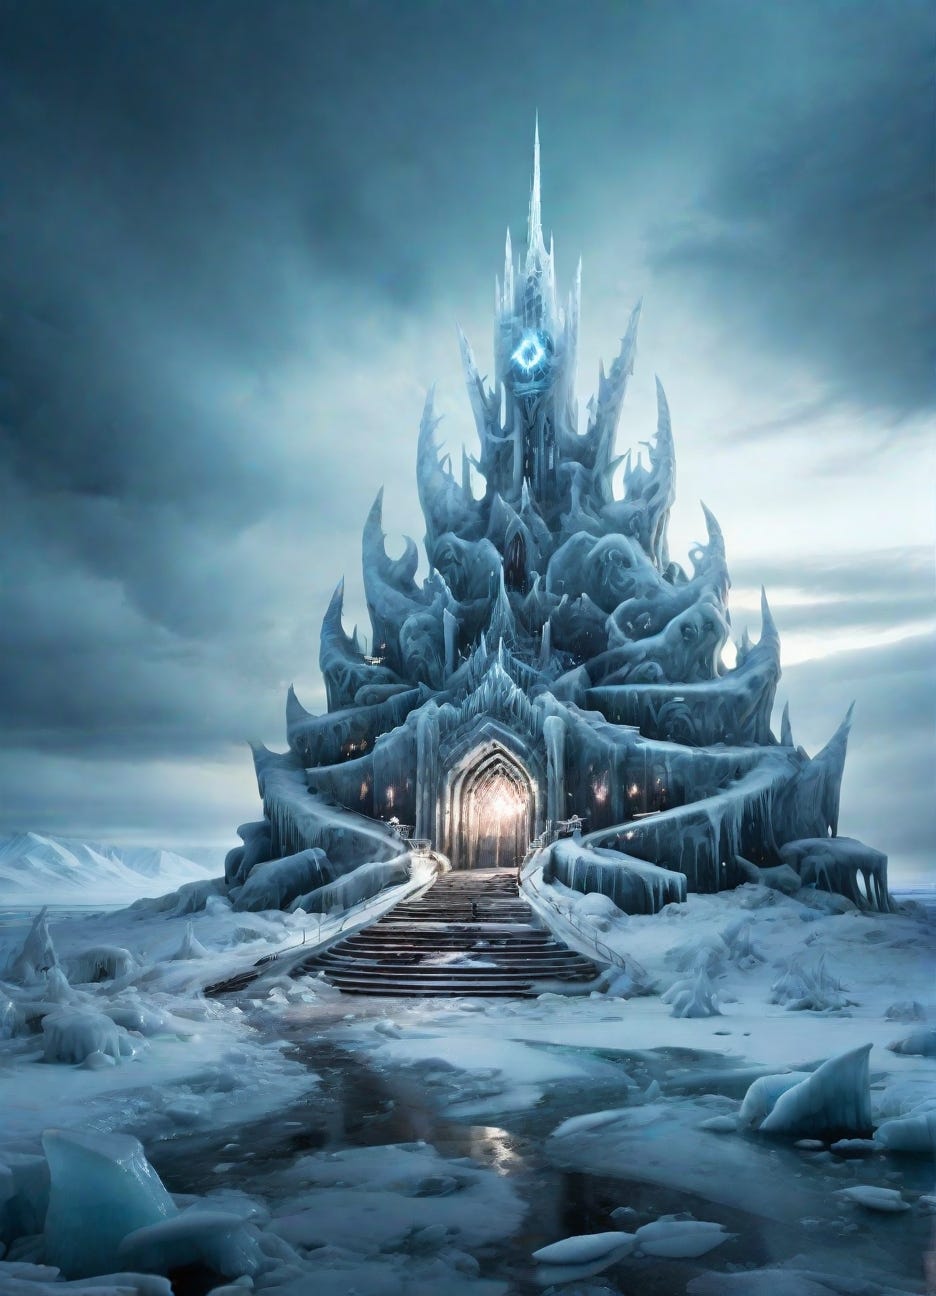 Seven Kingdoms: The Ice Queen - by Aaron Michael Thomas